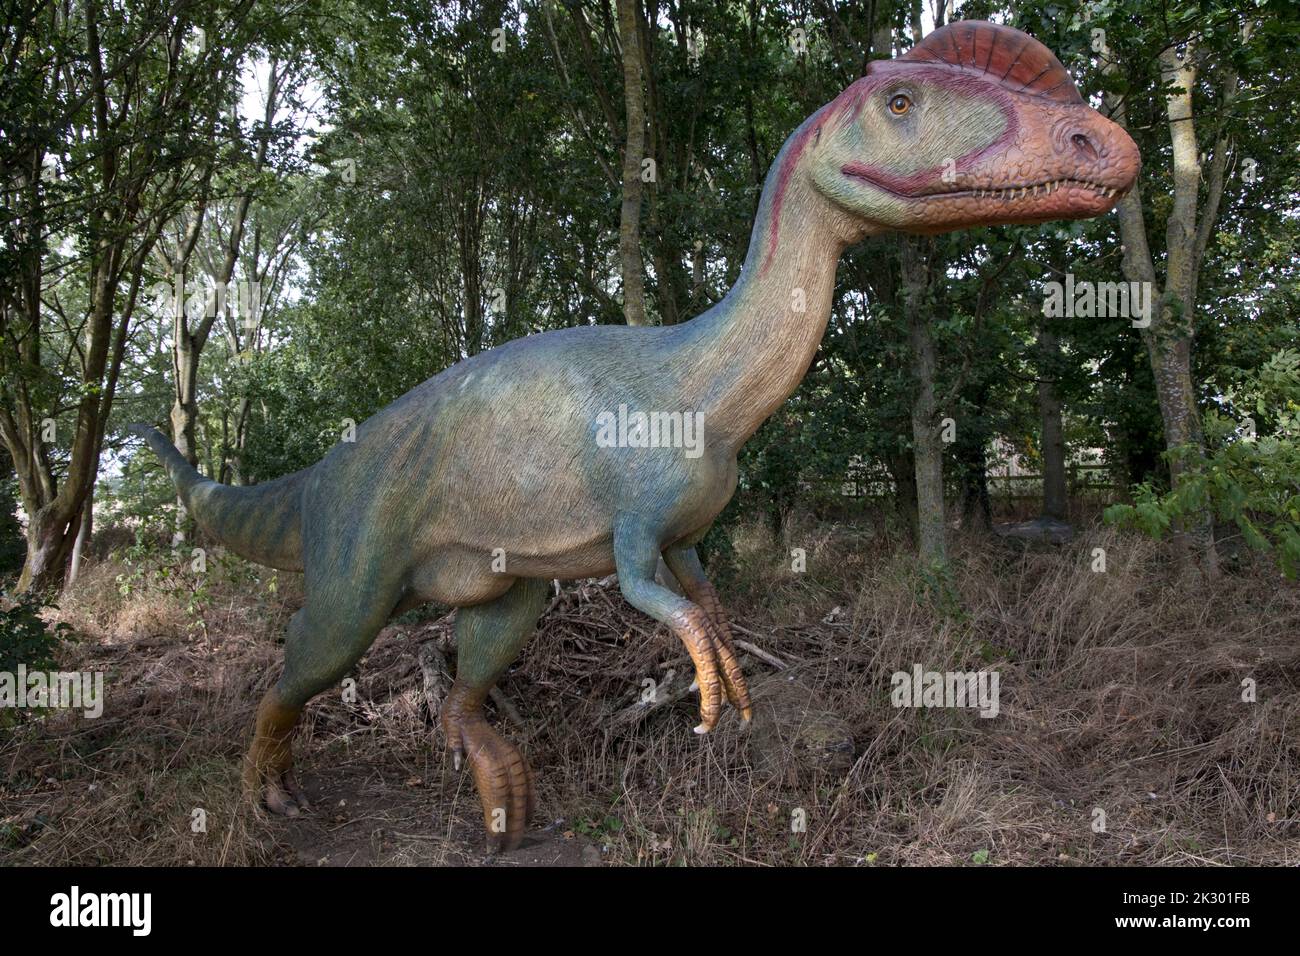 Lifesize model of Dilophosaurus with two bony crests on its head was a fast moving meat eating dinosaur of the early Jurassic at All Things Wild, Hone Stock Photo